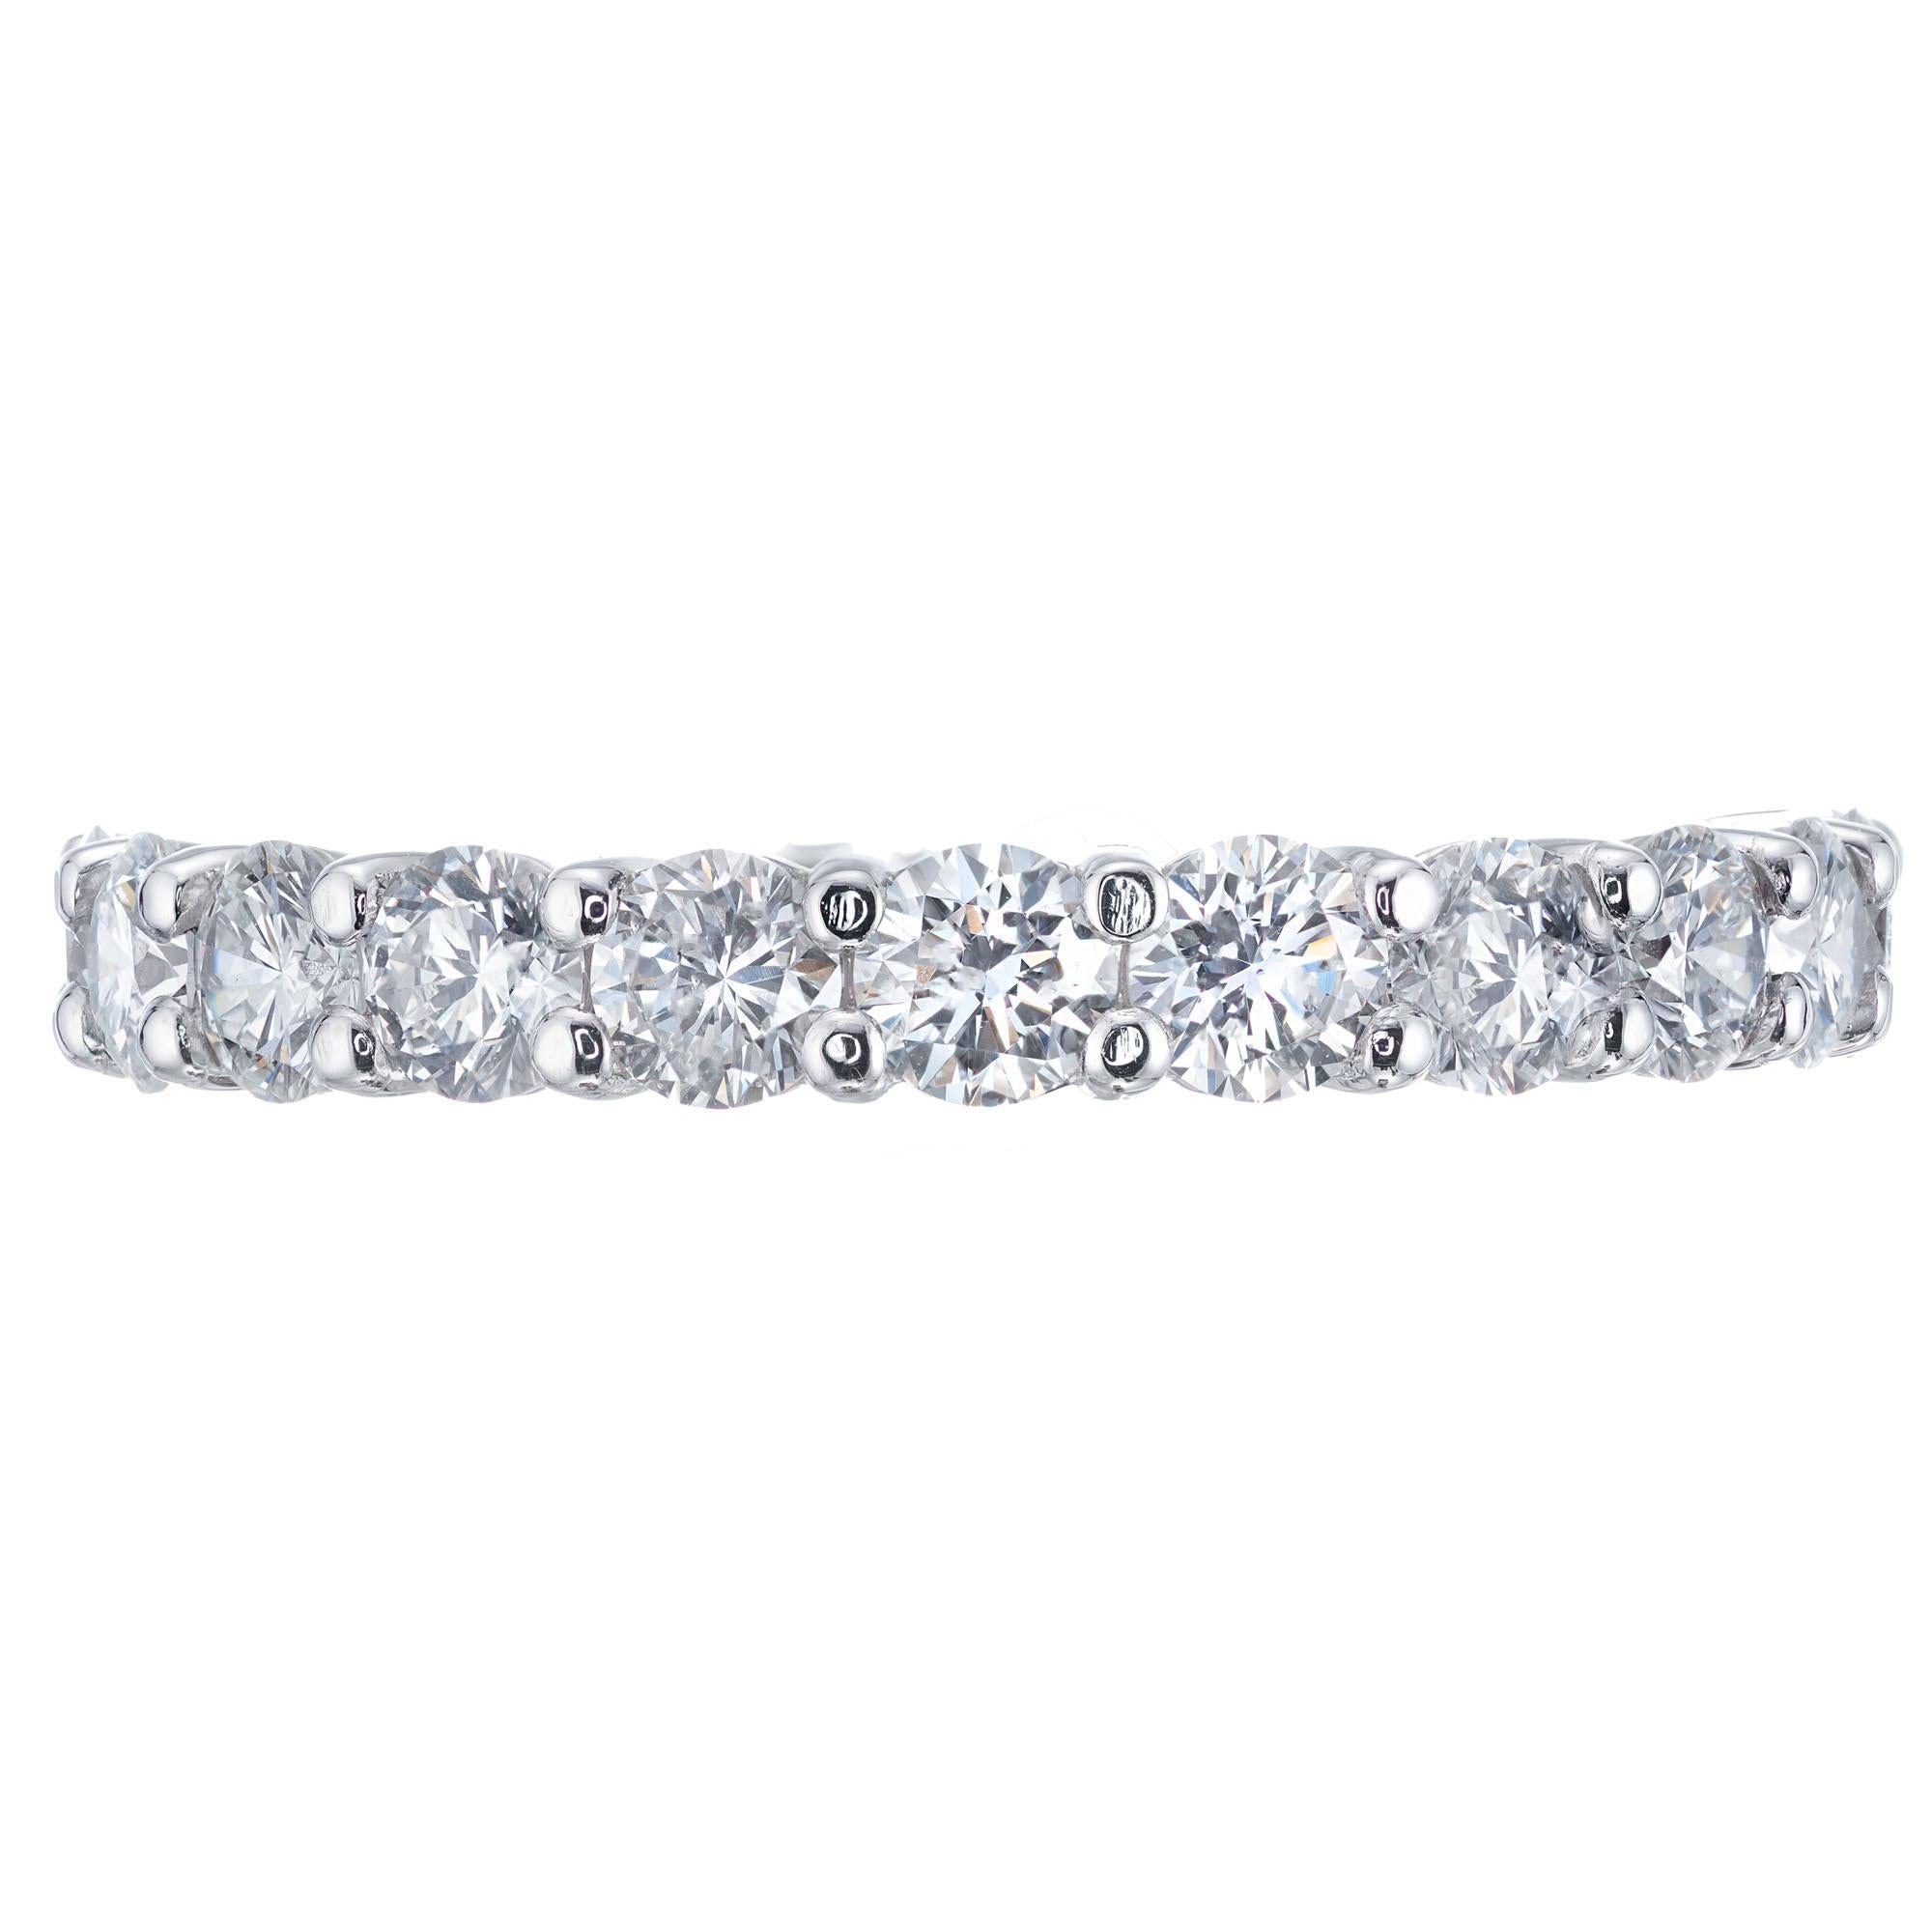 10 round full cut diamond wedding band platinum ring. Crafted in the Peter Suchy workshop.

10 round brilliant cut G VS, approx. 1.18cts
Size 6 and sizable
Platinum 
Stamped: PLAT
4.4 grams
Width at top: 3.1mm
Height at top: 2.7mm
Width at bottom: